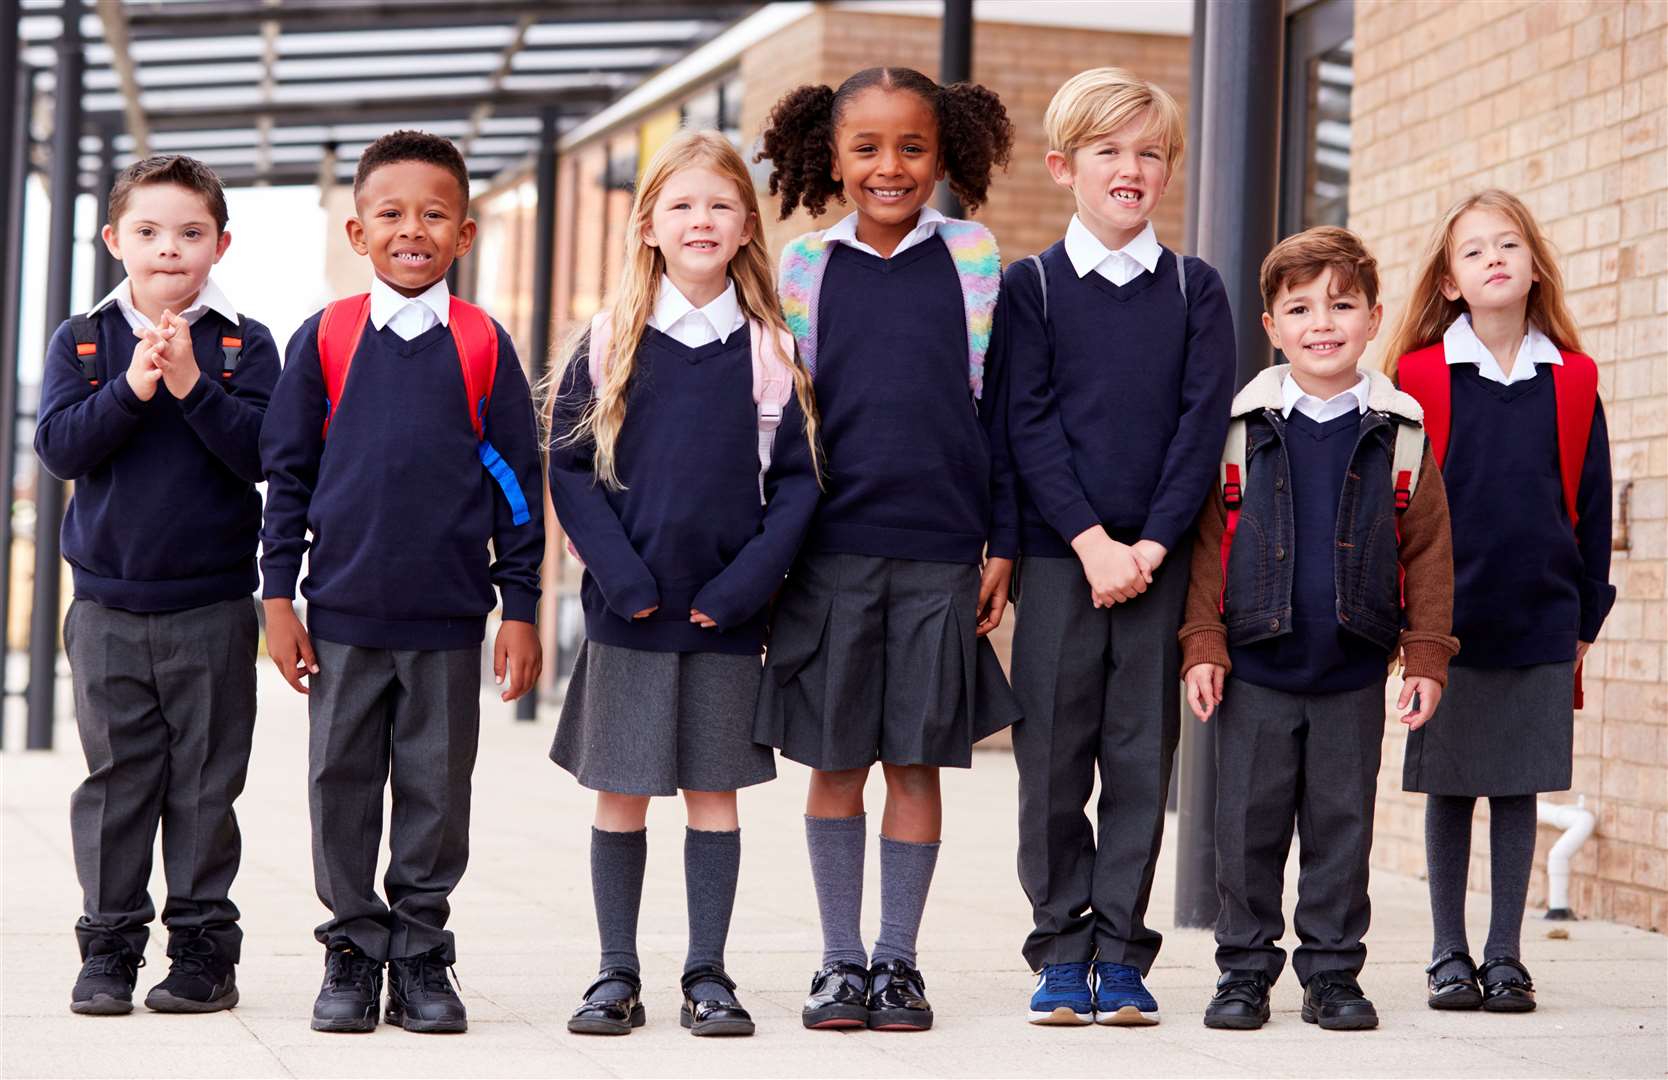 With the new school year just a couple of months away, supermarkets are starting to launch uniform deals. Image: iStock.